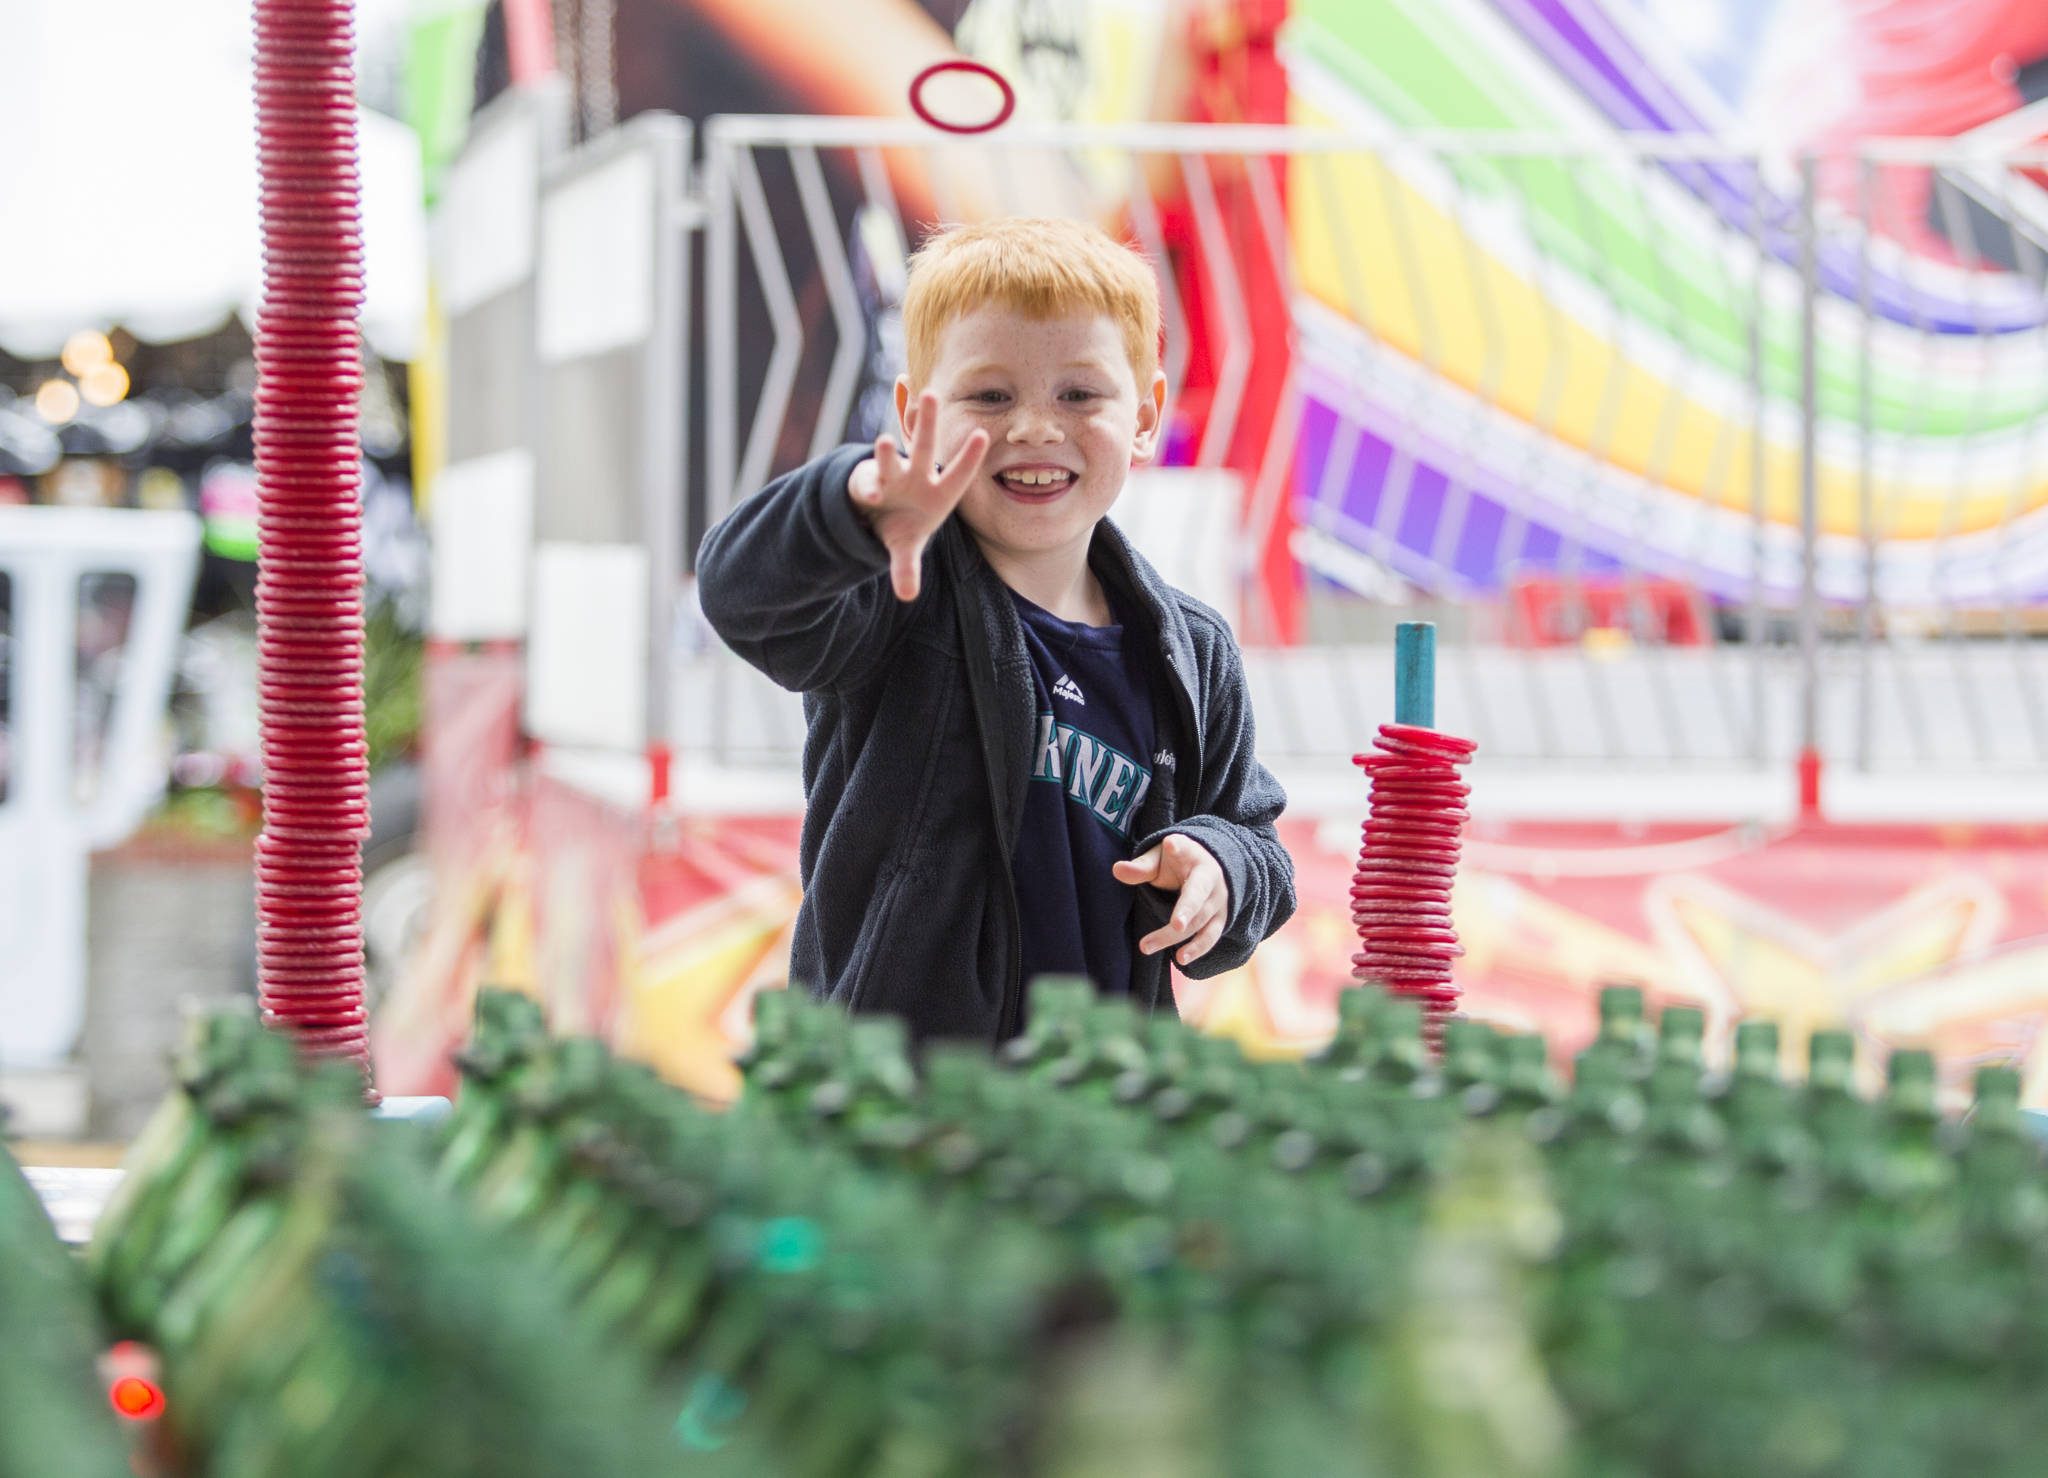 Wyatt Liddle, 7, plays a ring toss game during opening day of the Evergreen State Fair on Thursday in Monroe. (Olivia Vanni / The Herald)